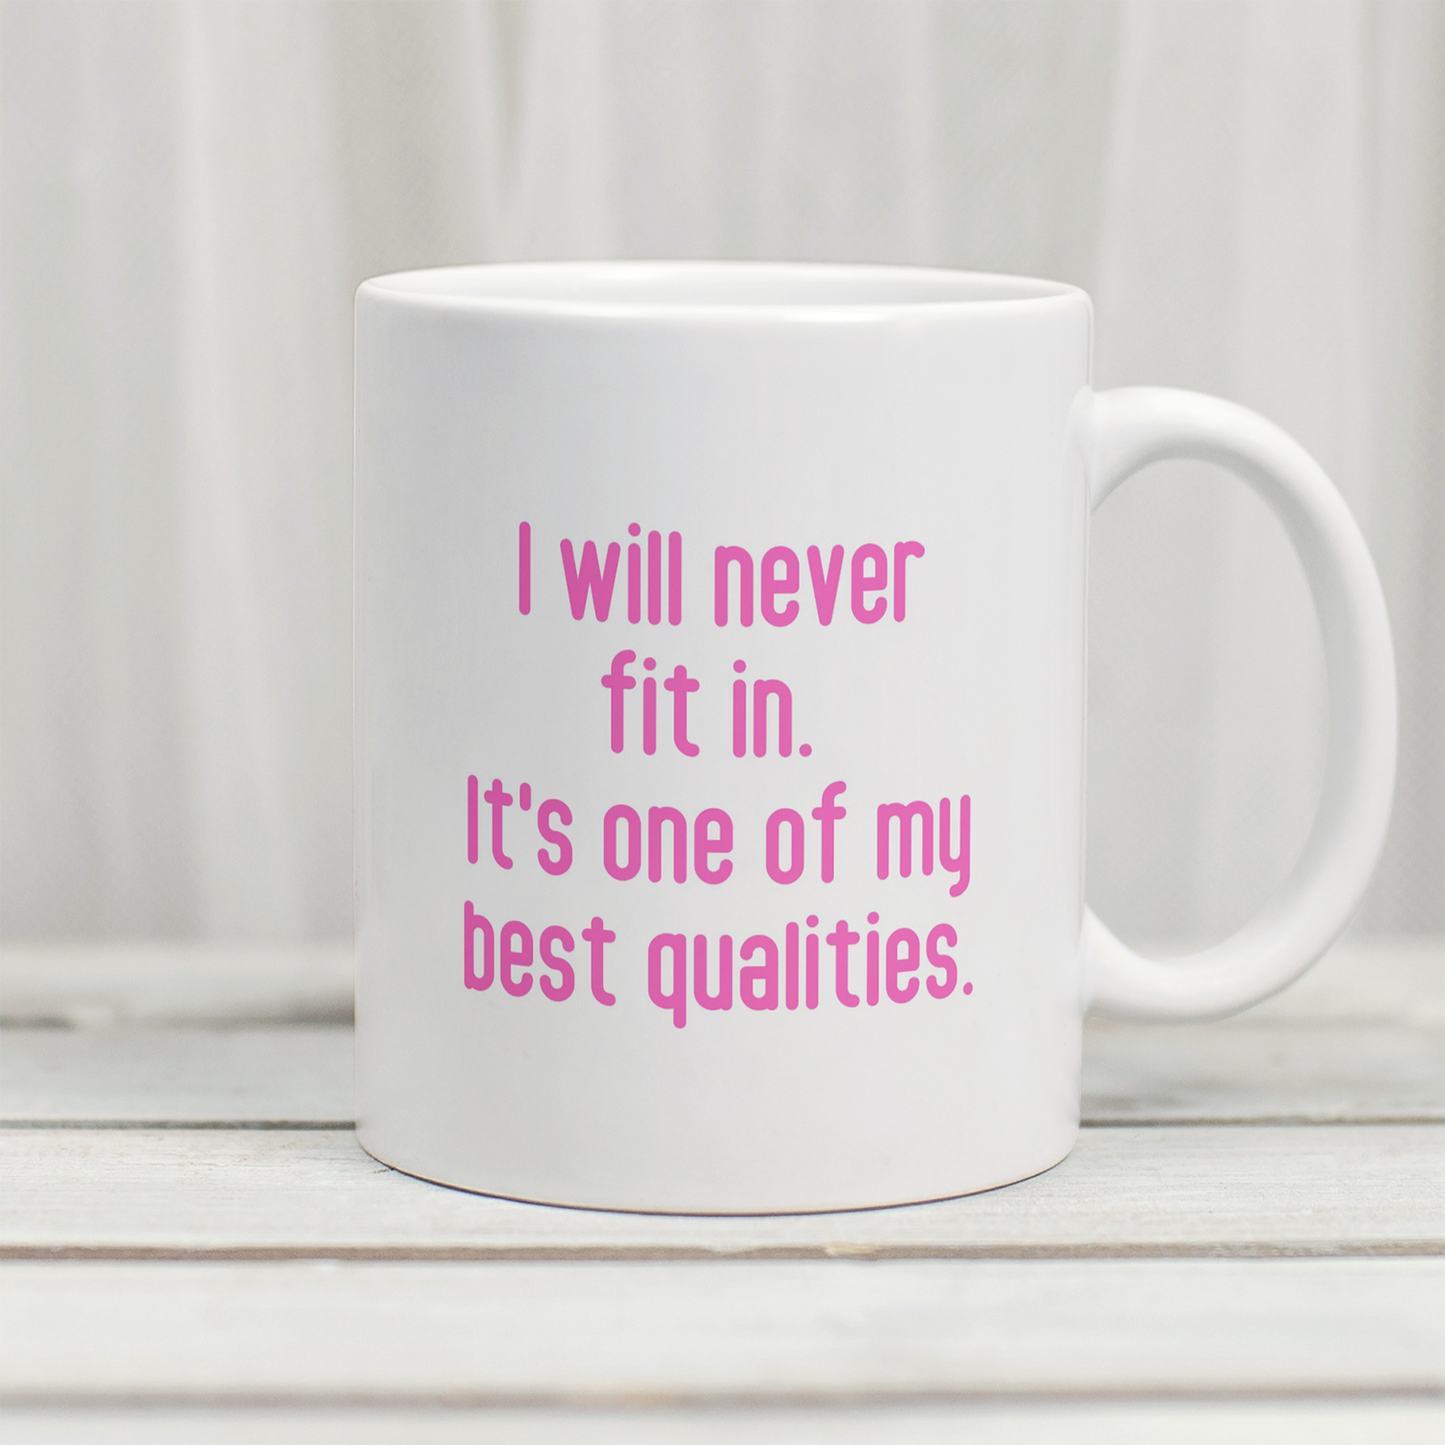 I will never fit in - Mug